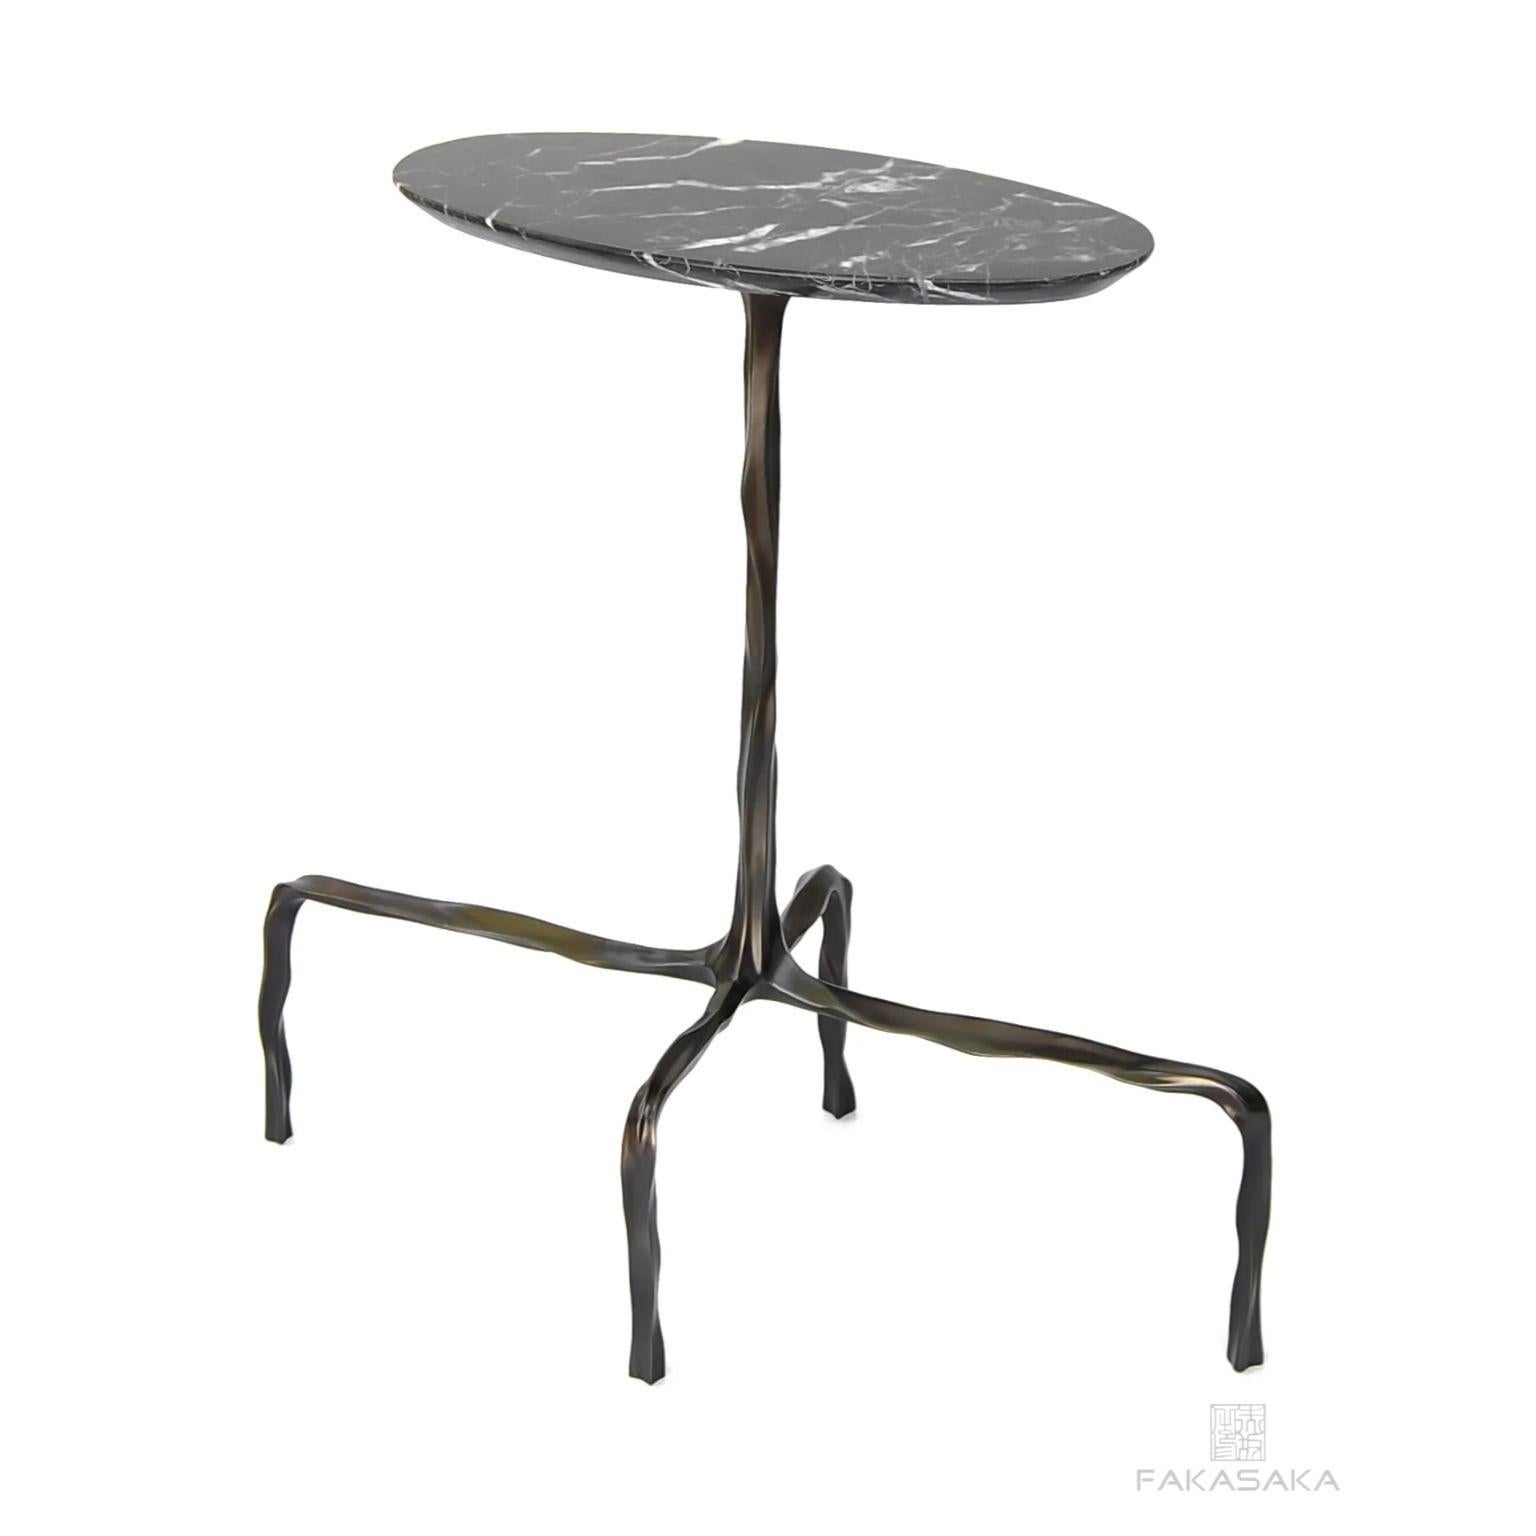 Bronze Presley Drink Table with Nero Marquina Marble Top by Fakasaka Design For Sale